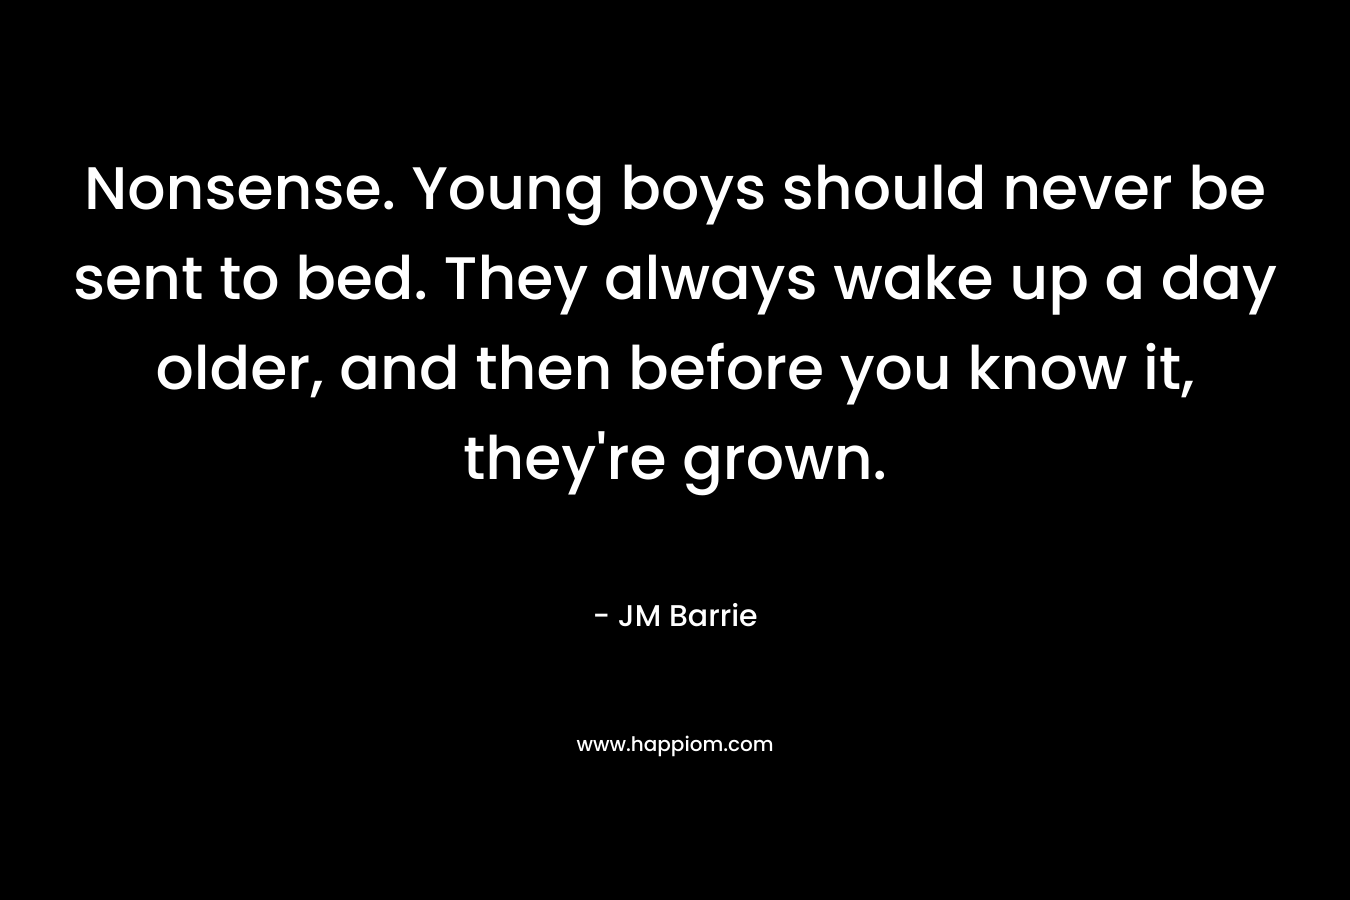 Nonsense. Young boys should never be sent to bed. They always wake up a day older, and then before you know it, they’re grown. – JM Barrie